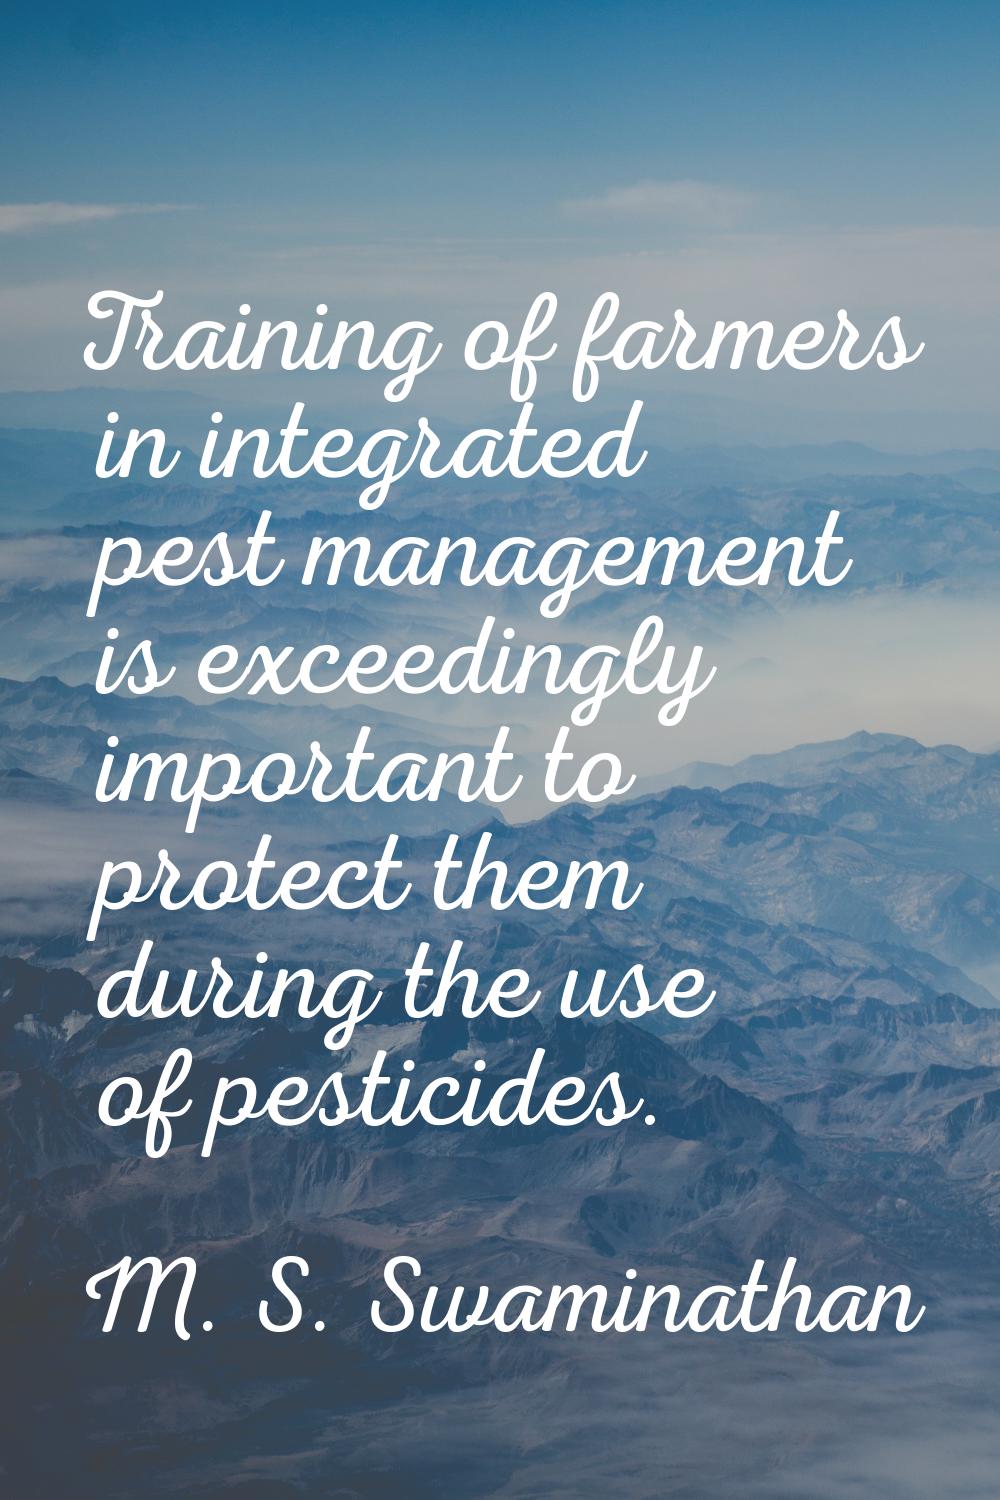 Training of farmers in integrated pest management is exceedingly important to protect them during t